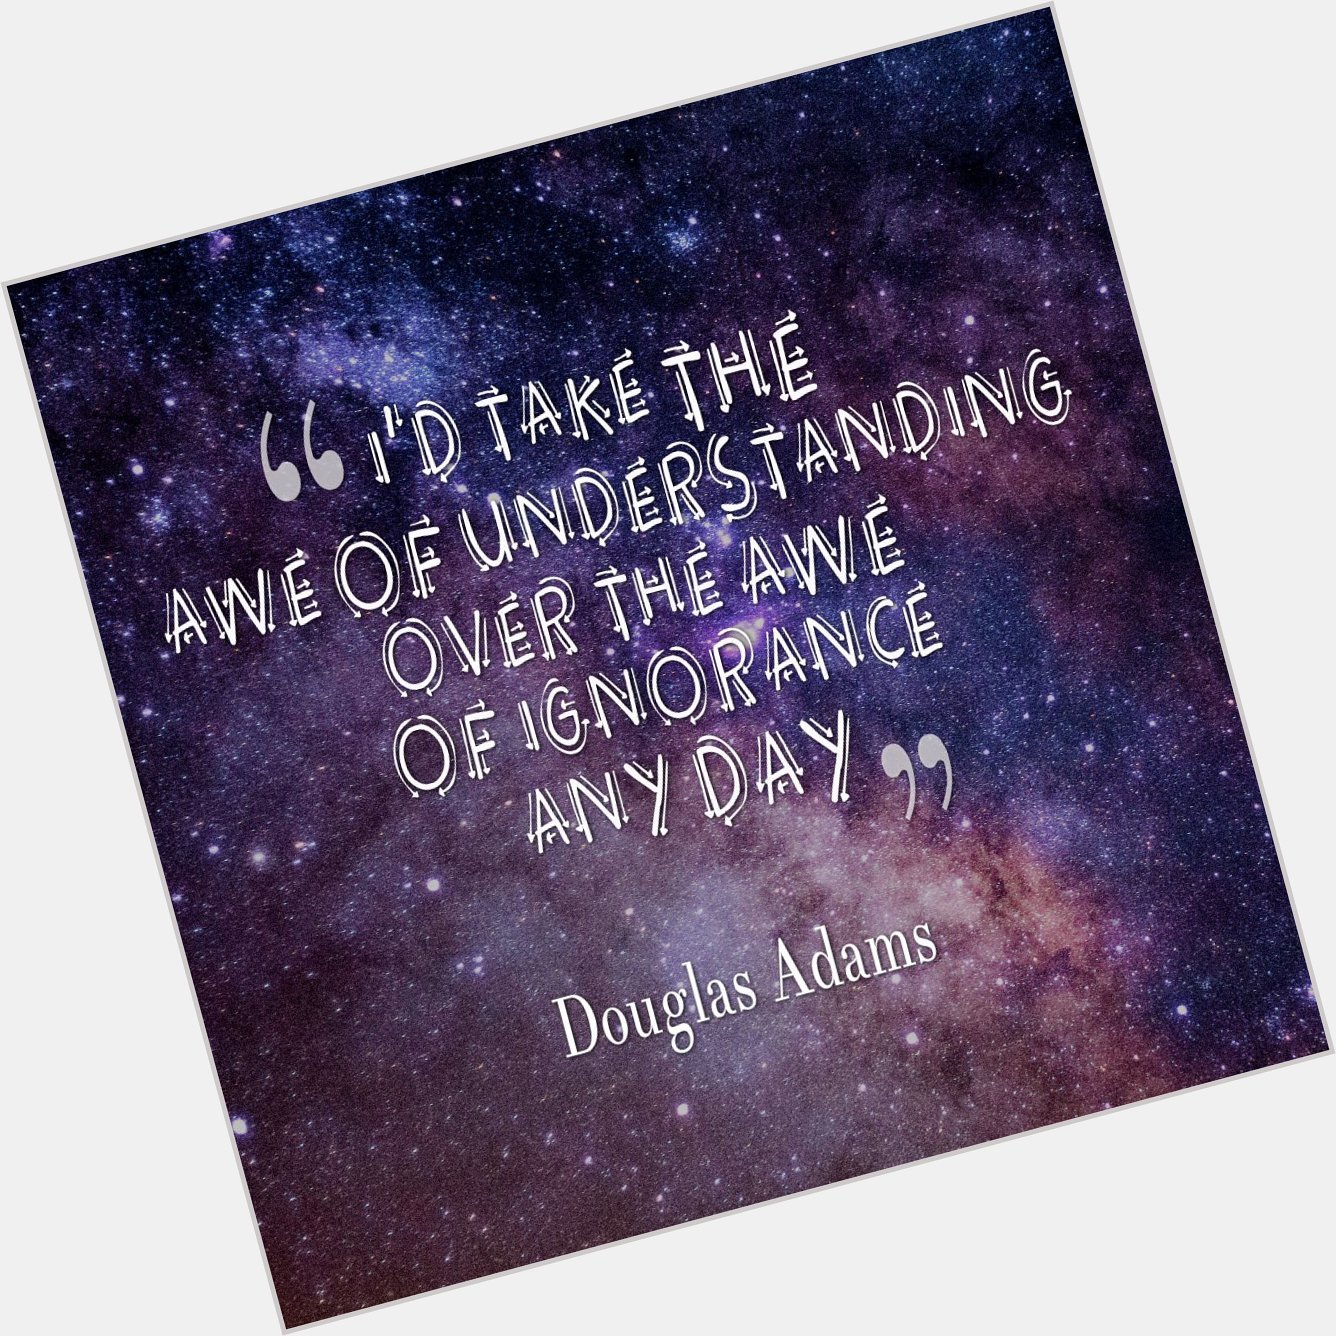 Happy birthday to Douglas Adams, born on this day in 1952.  